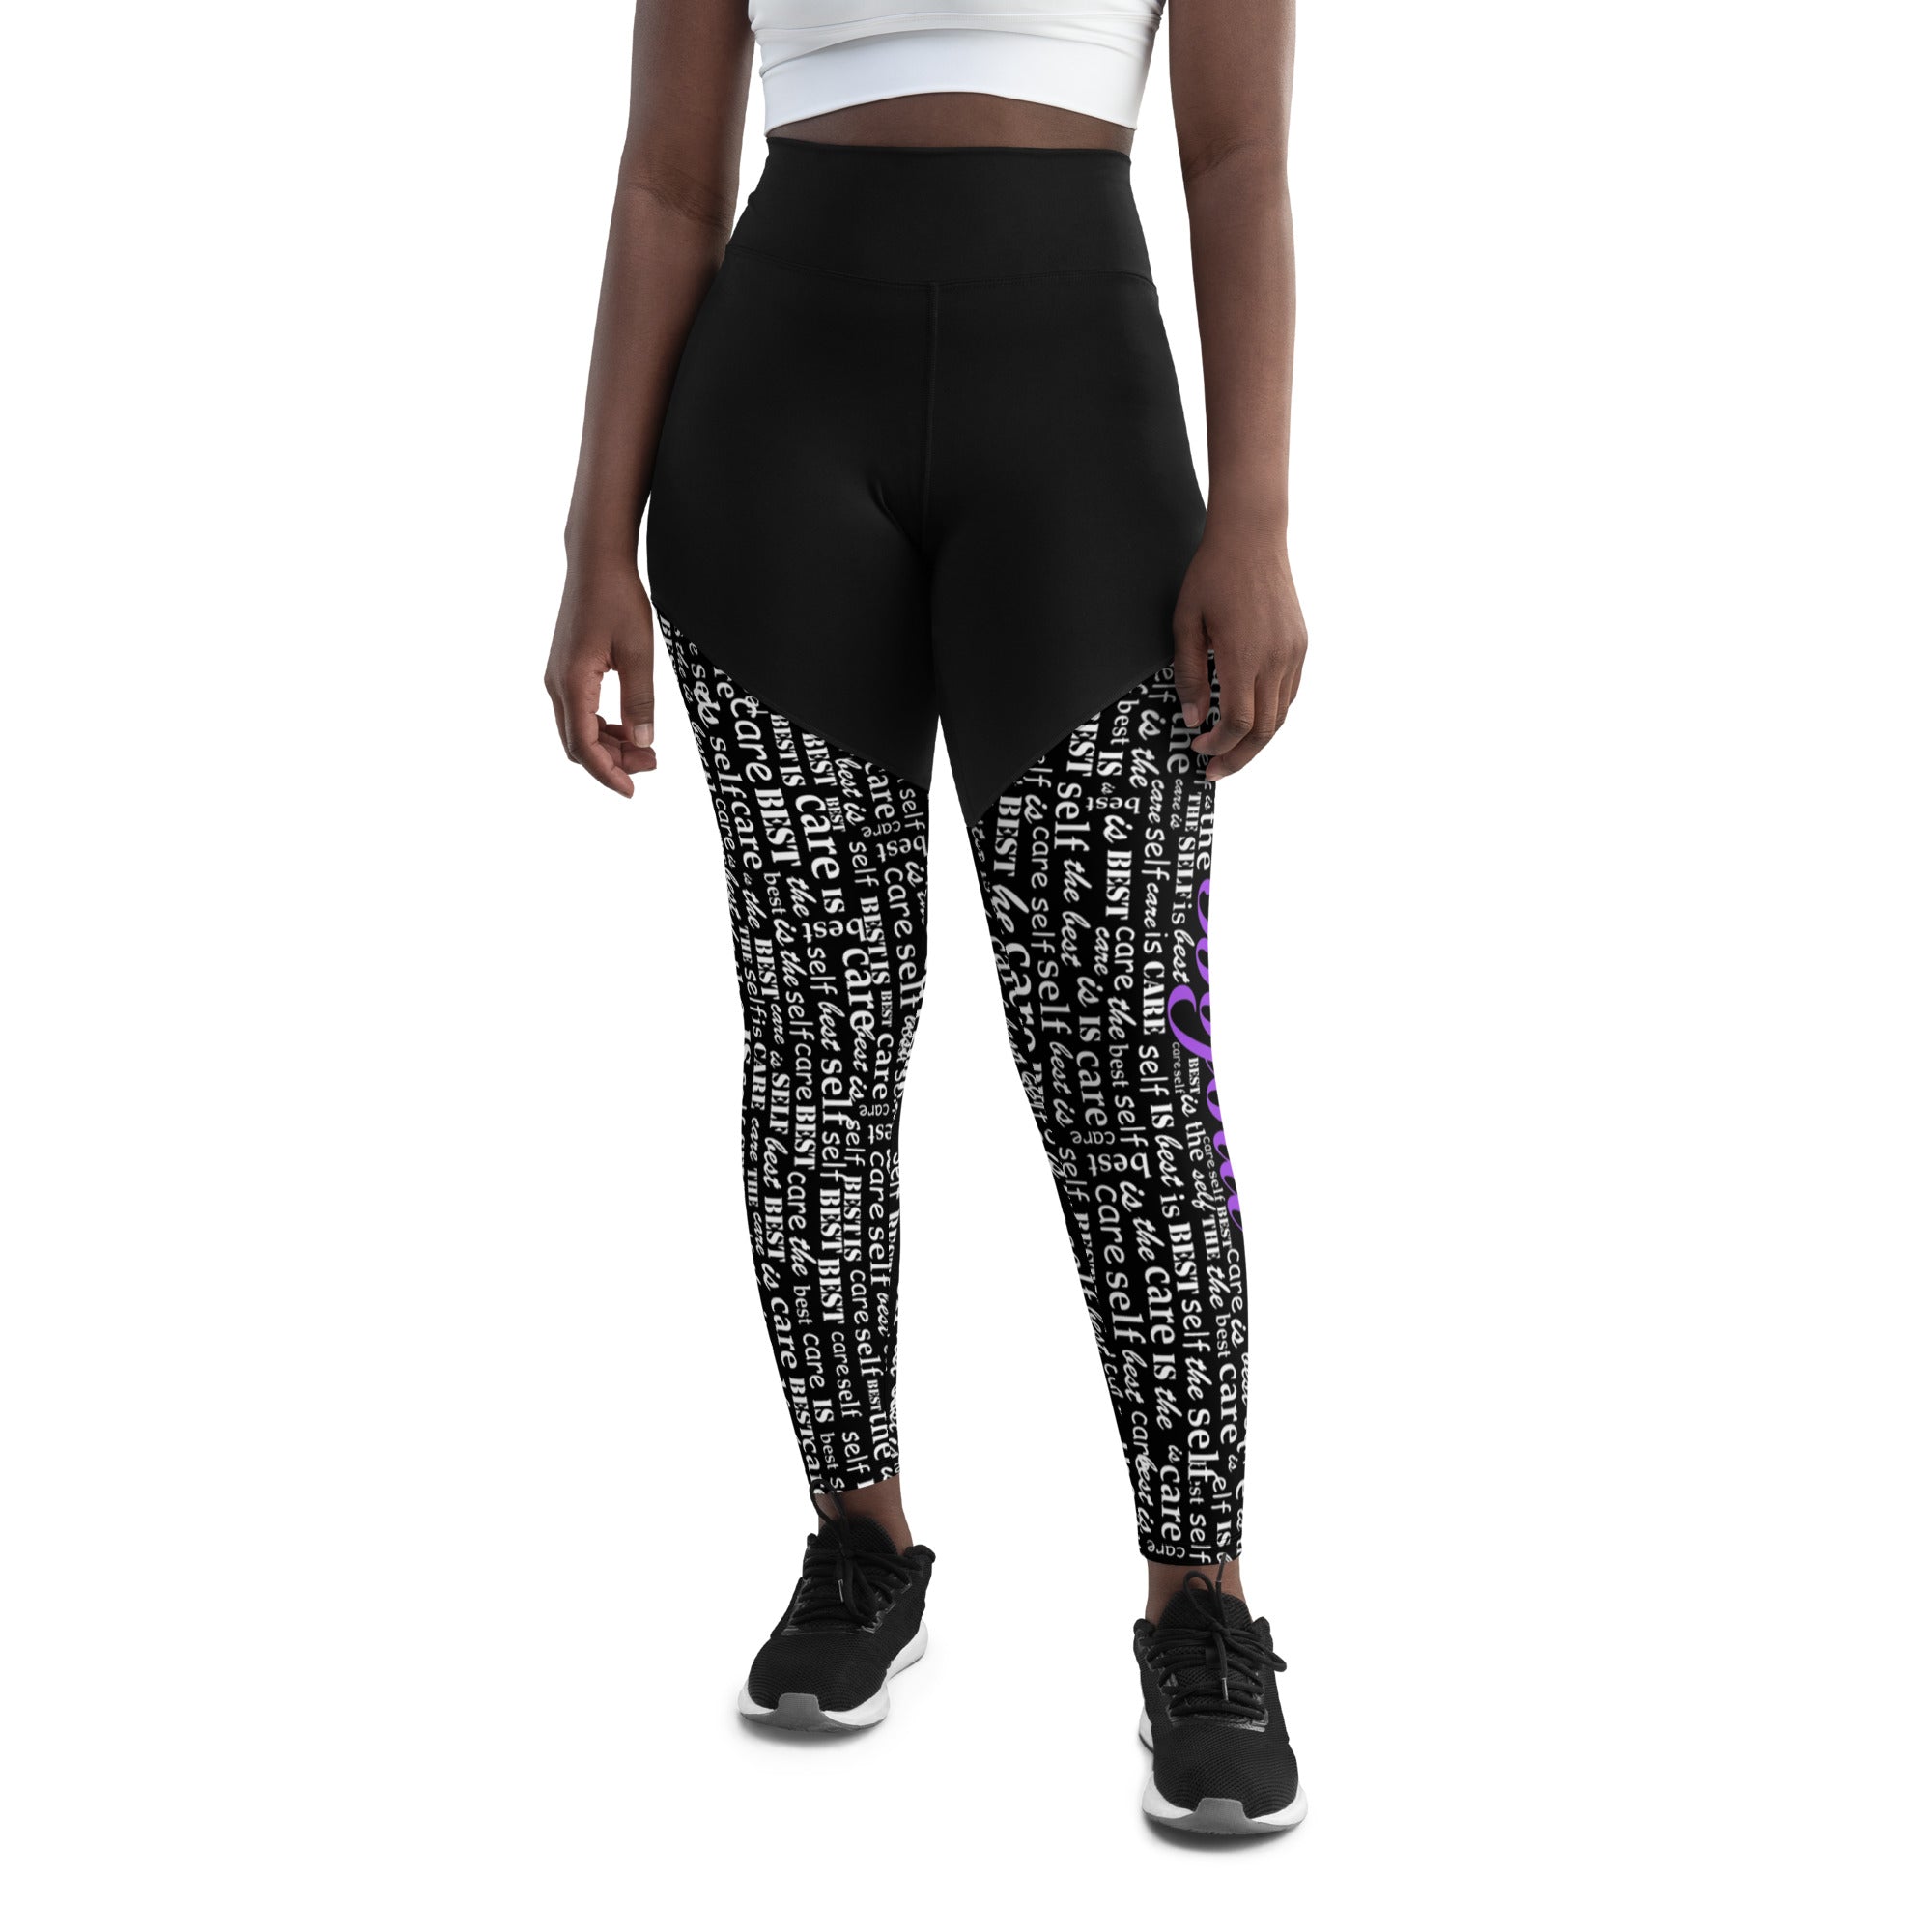 Bojoul Self Care Luxury Compression Sports Leggings (P) – THE BOJOUL STORE